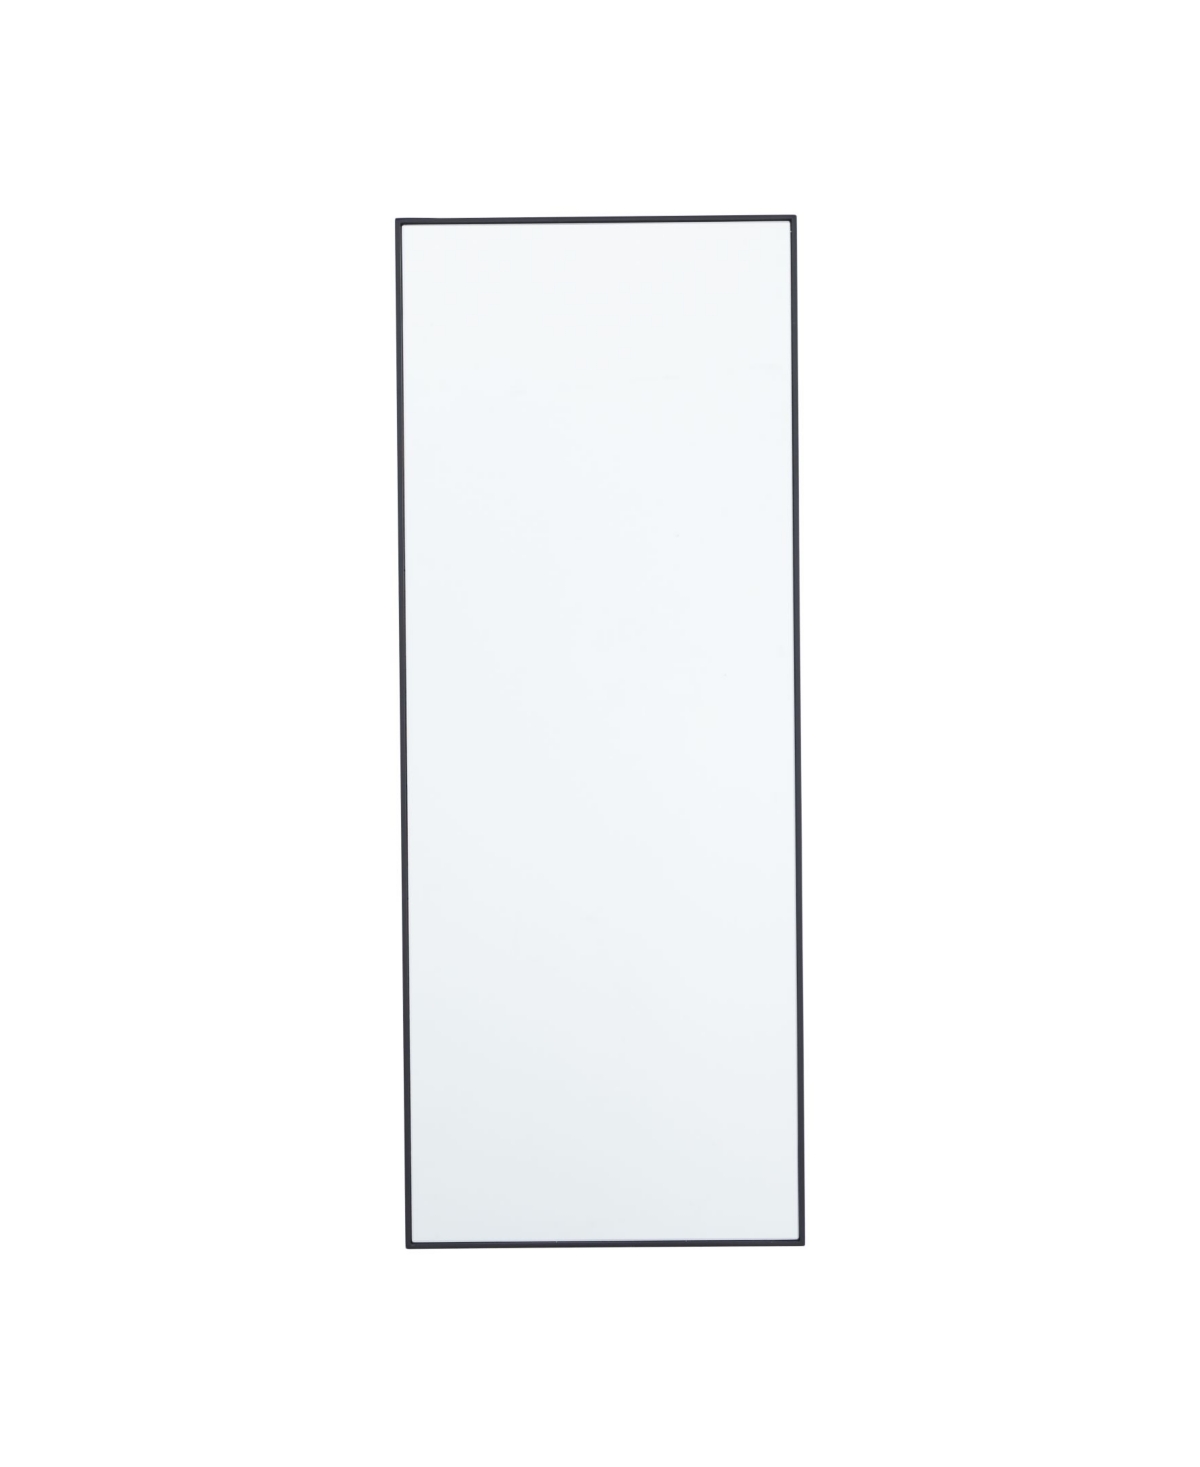 Contemporary Wood Wall Mirror, 40" x 24" - Gold-Tone  x